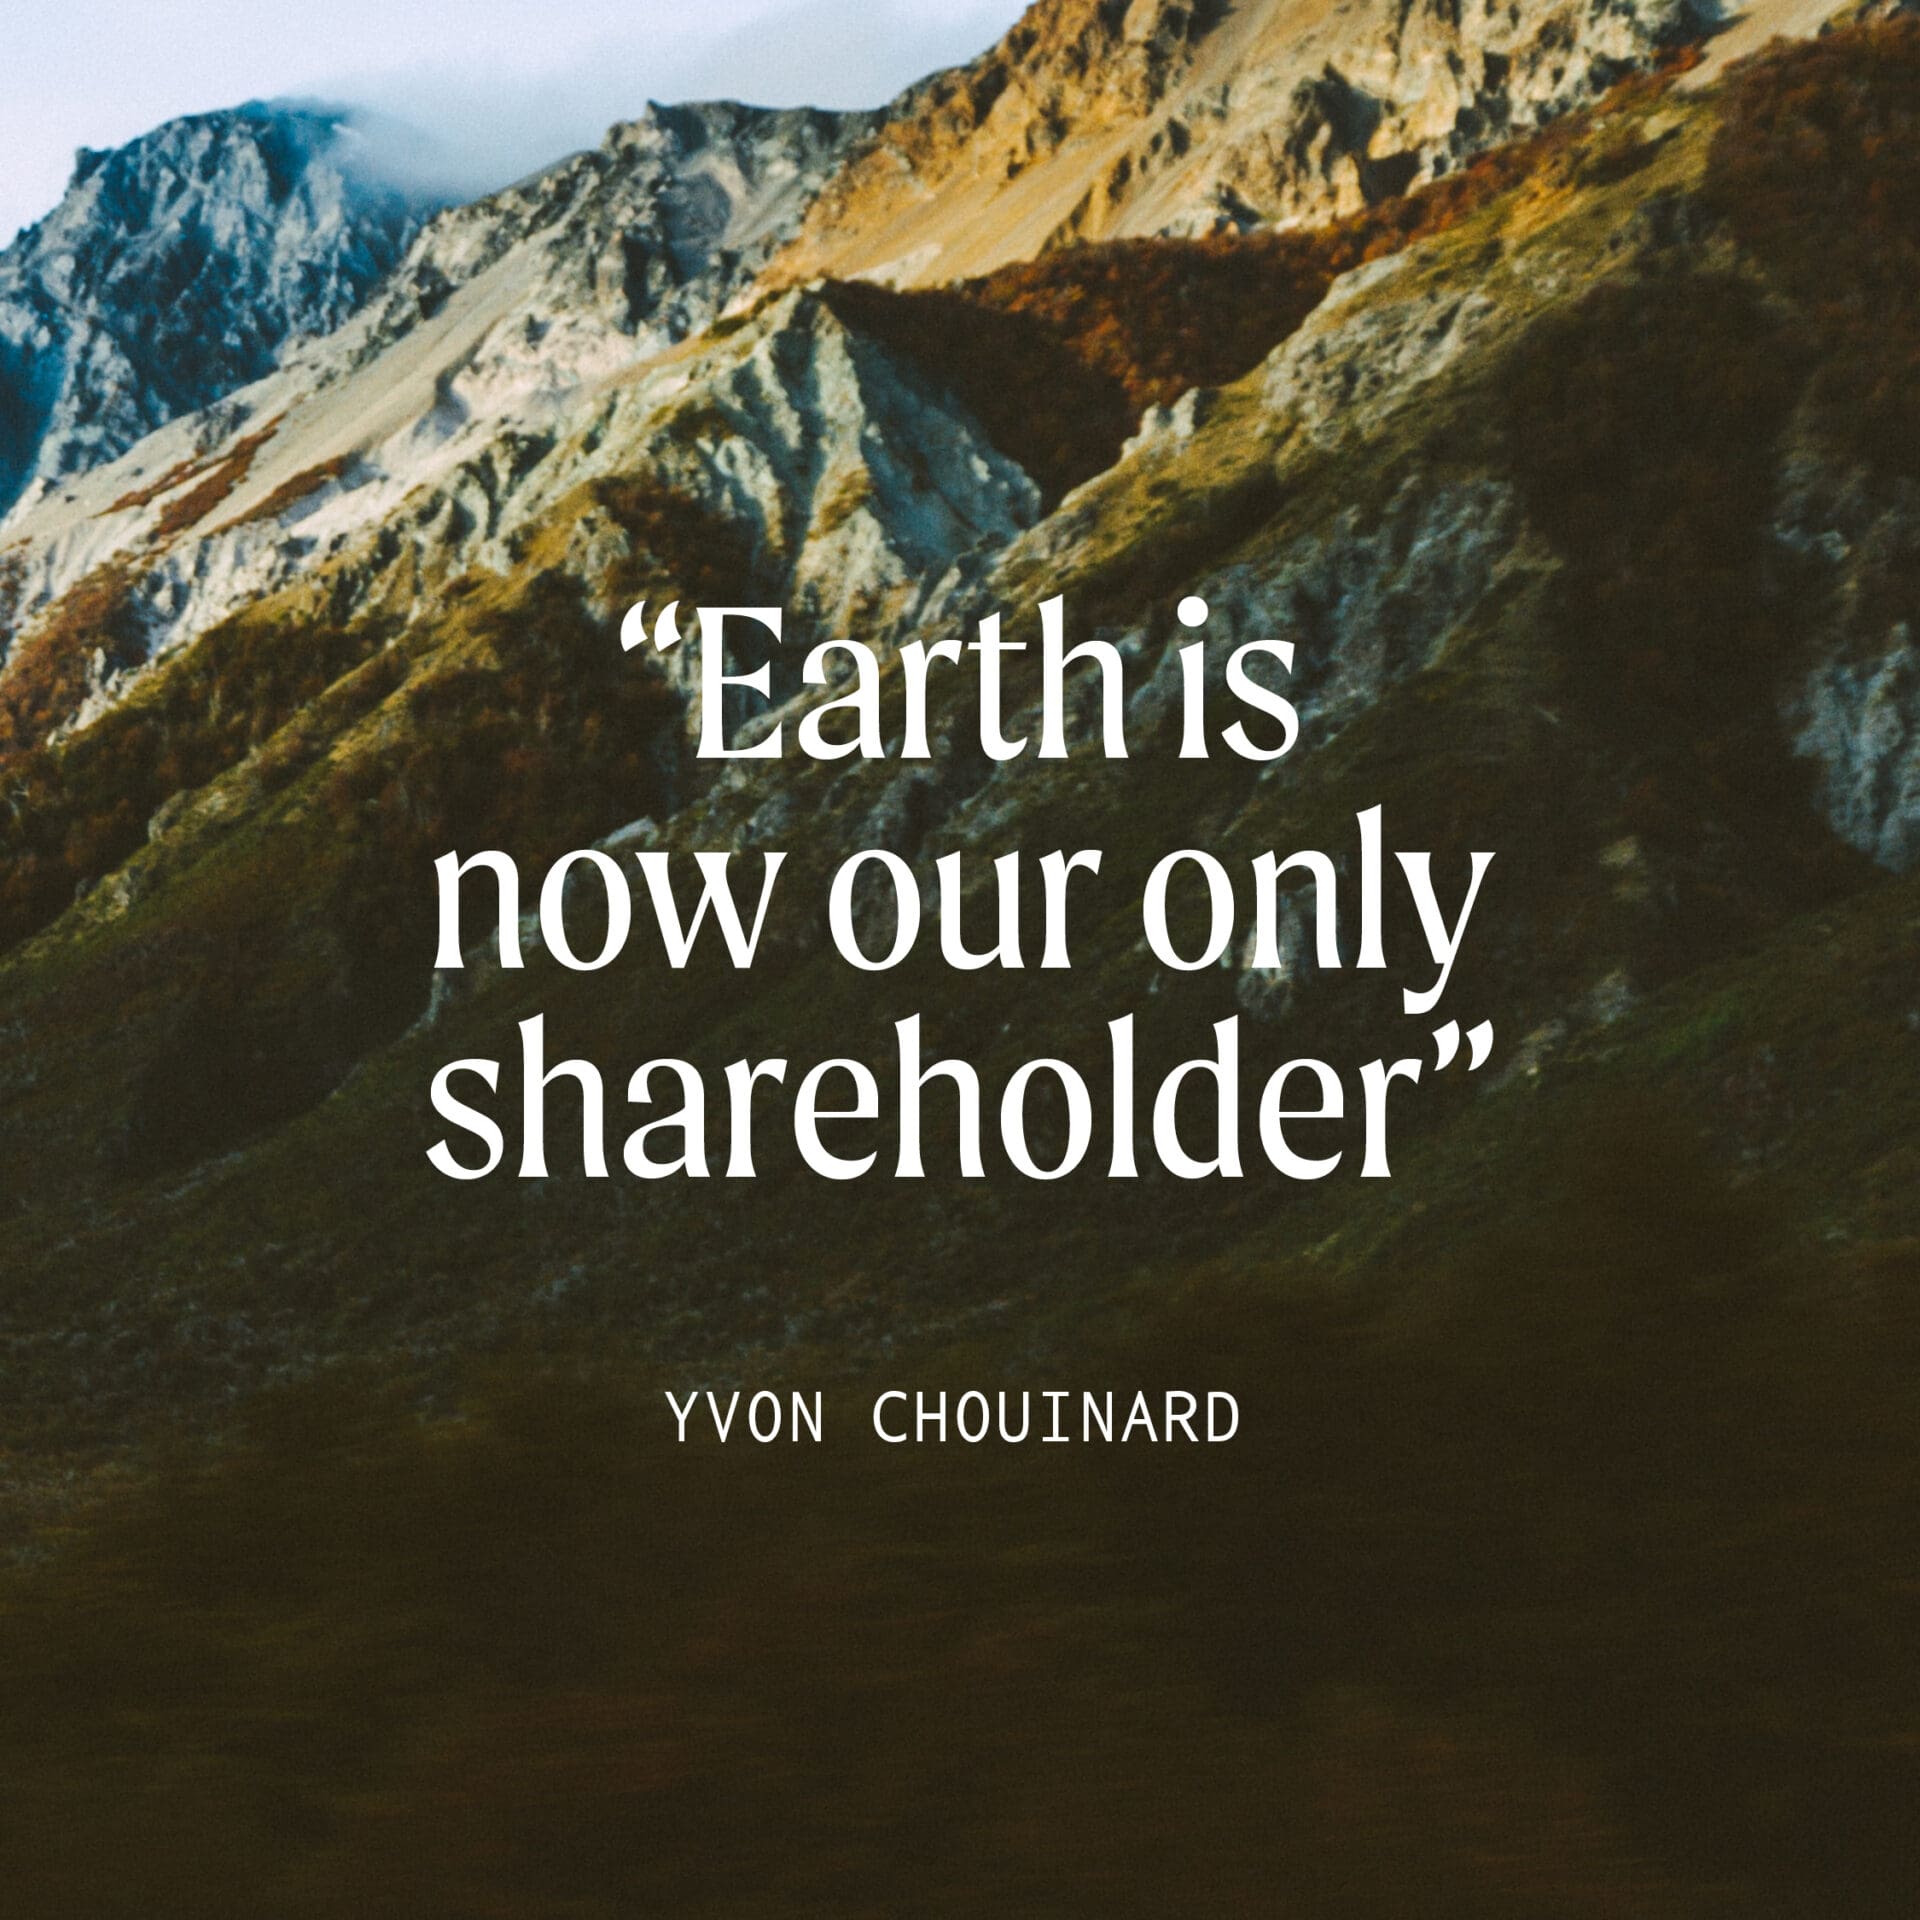 A quote by Patagonia founder Yvon Chuinard: Earth is our only shareholder